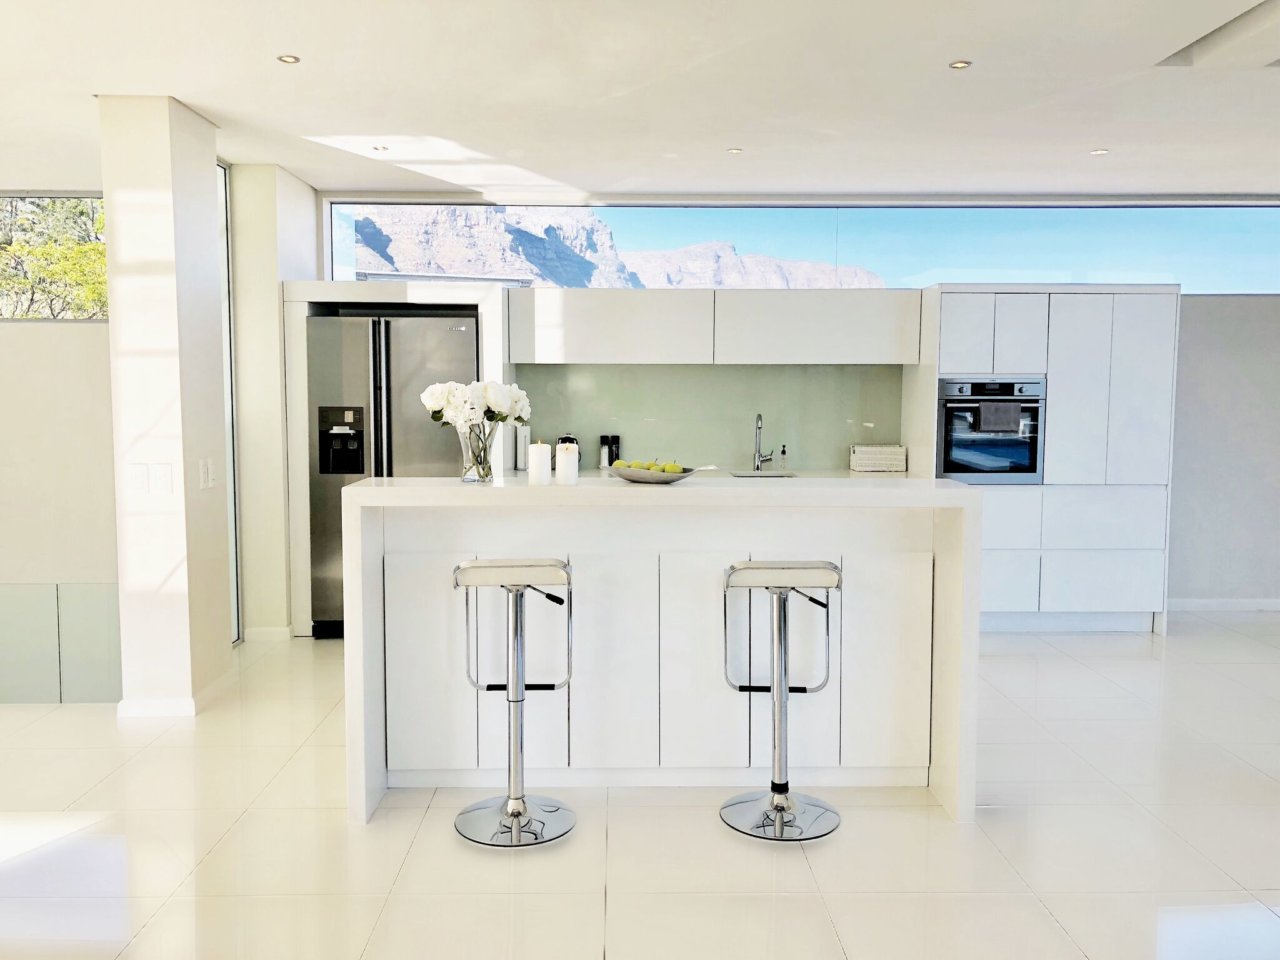 Photo 4 of Aqua Penthouse accommodation in Camps Bay, Cape Town with 2 bedrooms and 2 bathrooms